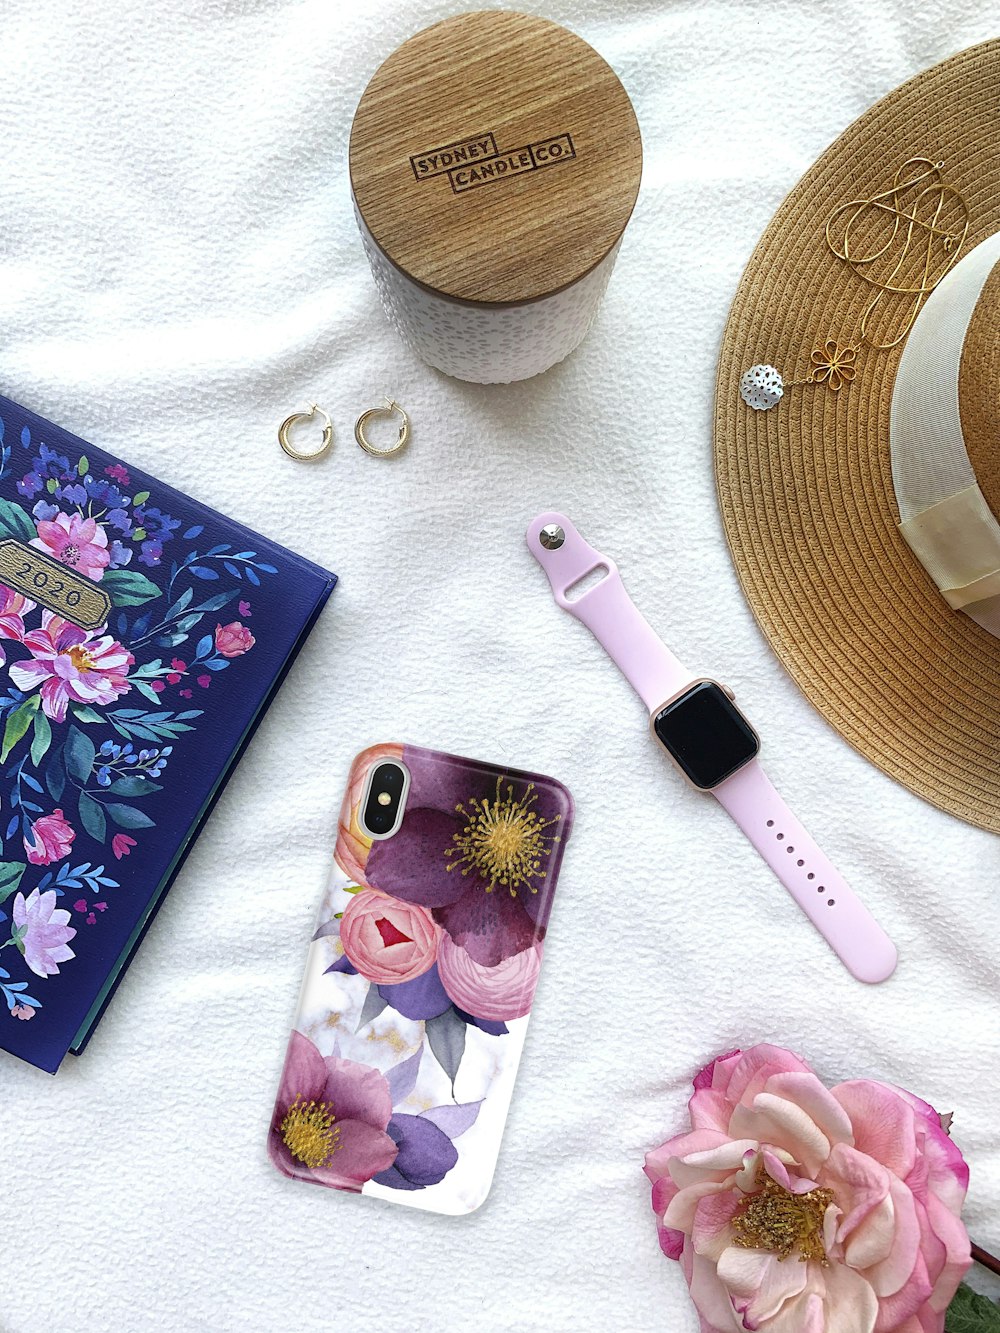 pink and black hair brush beside purple and white floral iphone case